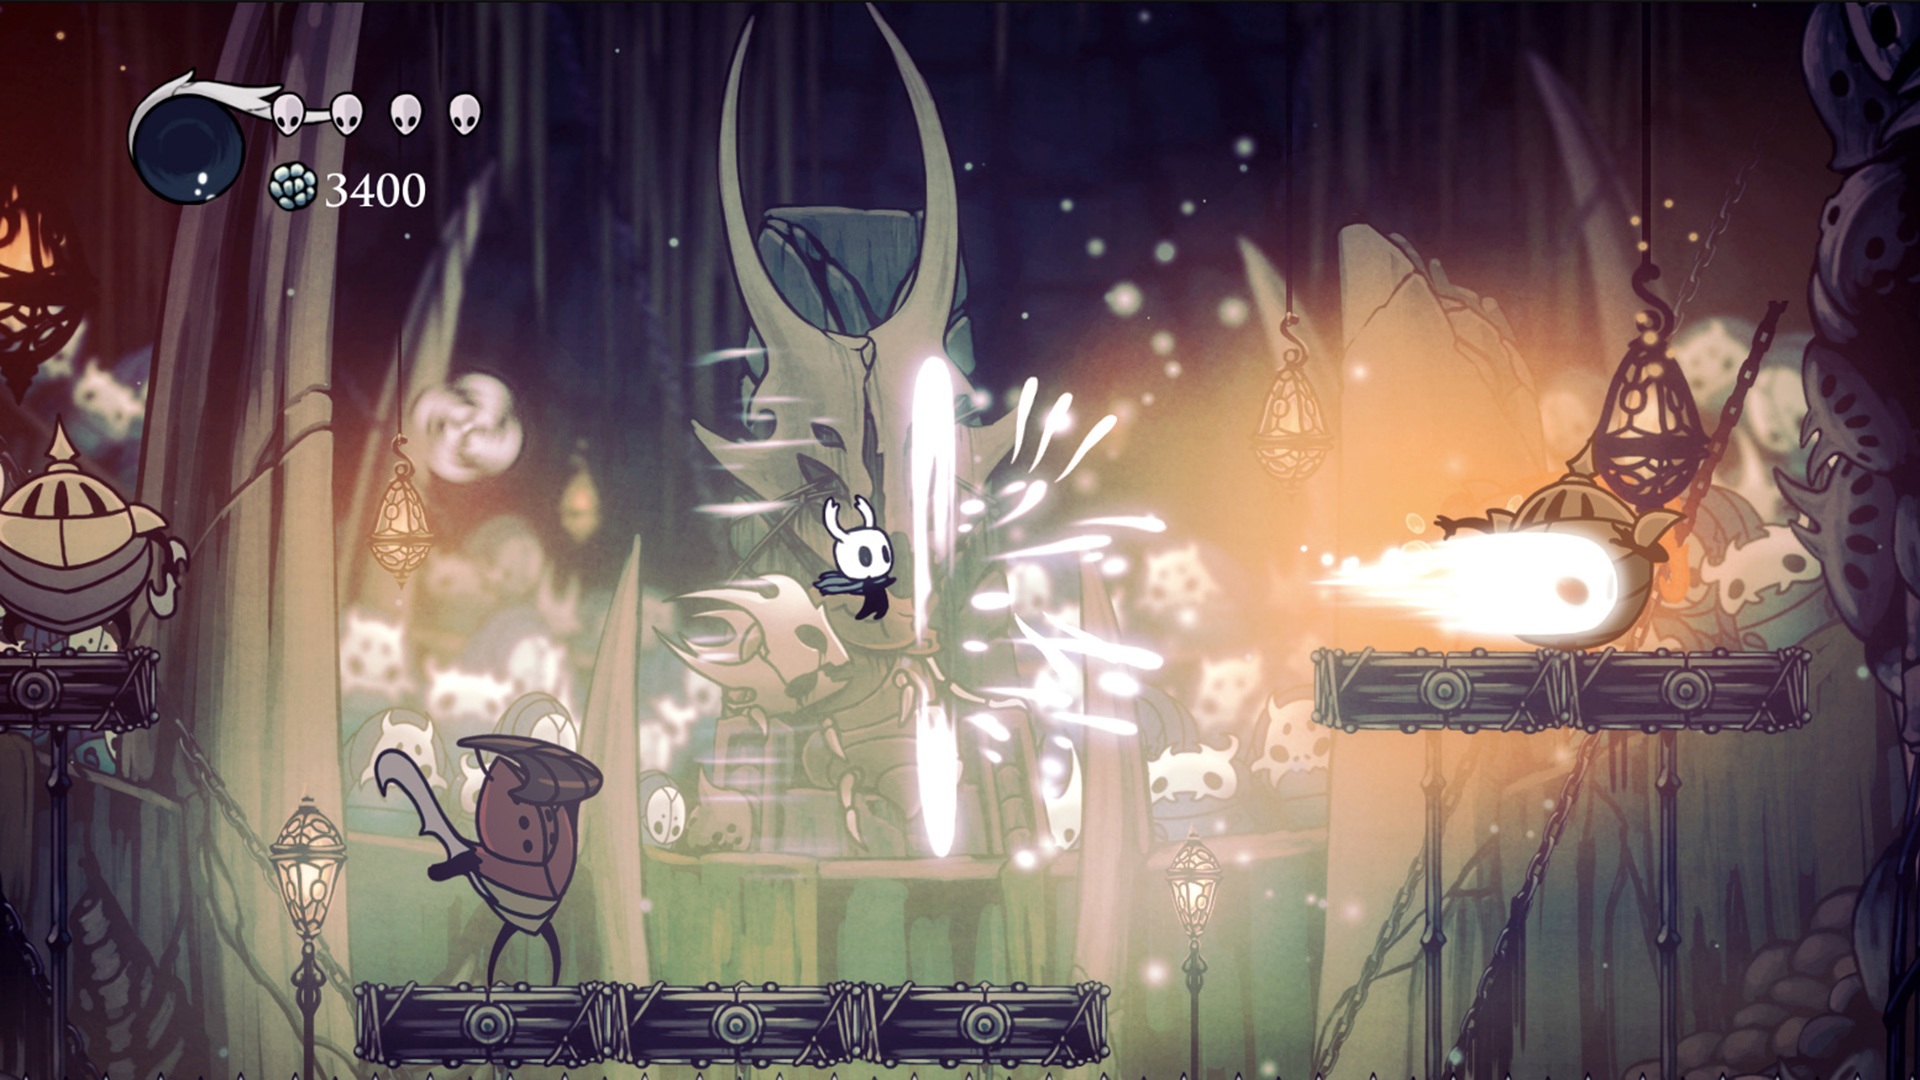 Best fantasy games: Hollow Knight. Image shows Hollow Knight jumping and firing a beam in battle with other knights.